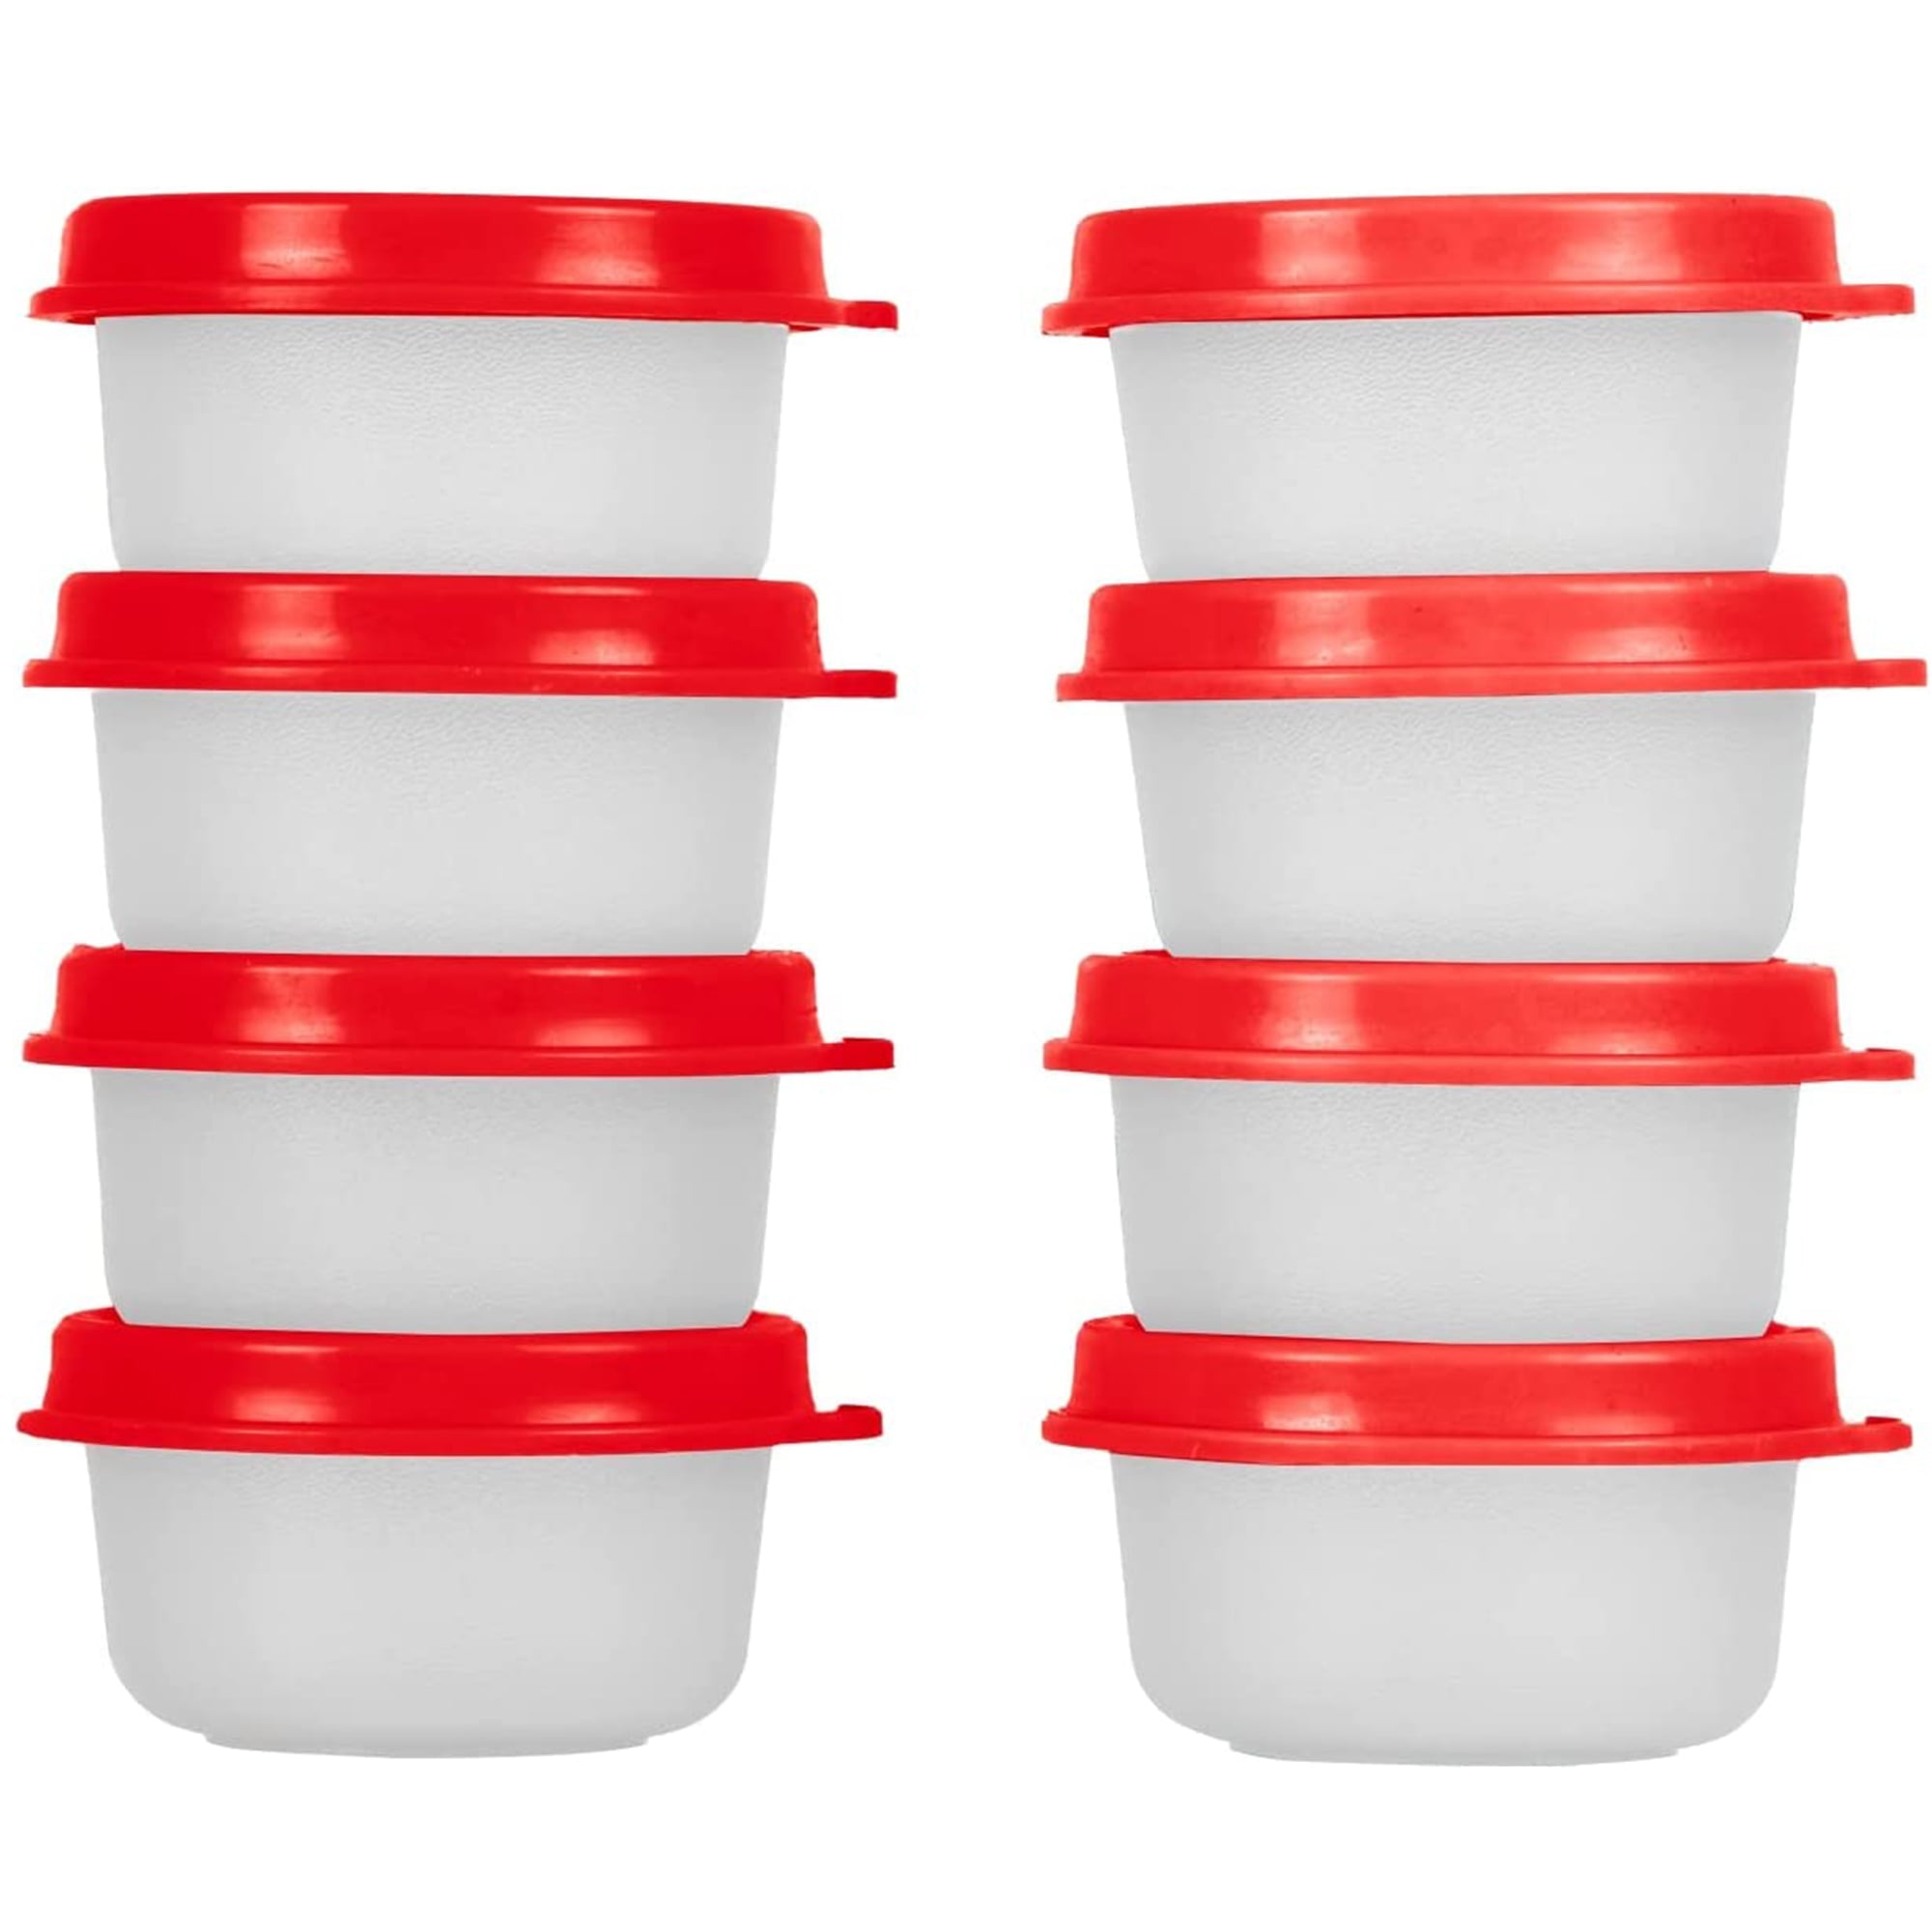 Yumuk Salad Dressing Container To Go, 4x2 oz Small Condiment Containers  with Lids - Rainbow Color Resuable Dip Containers for Lunches, Easy Open